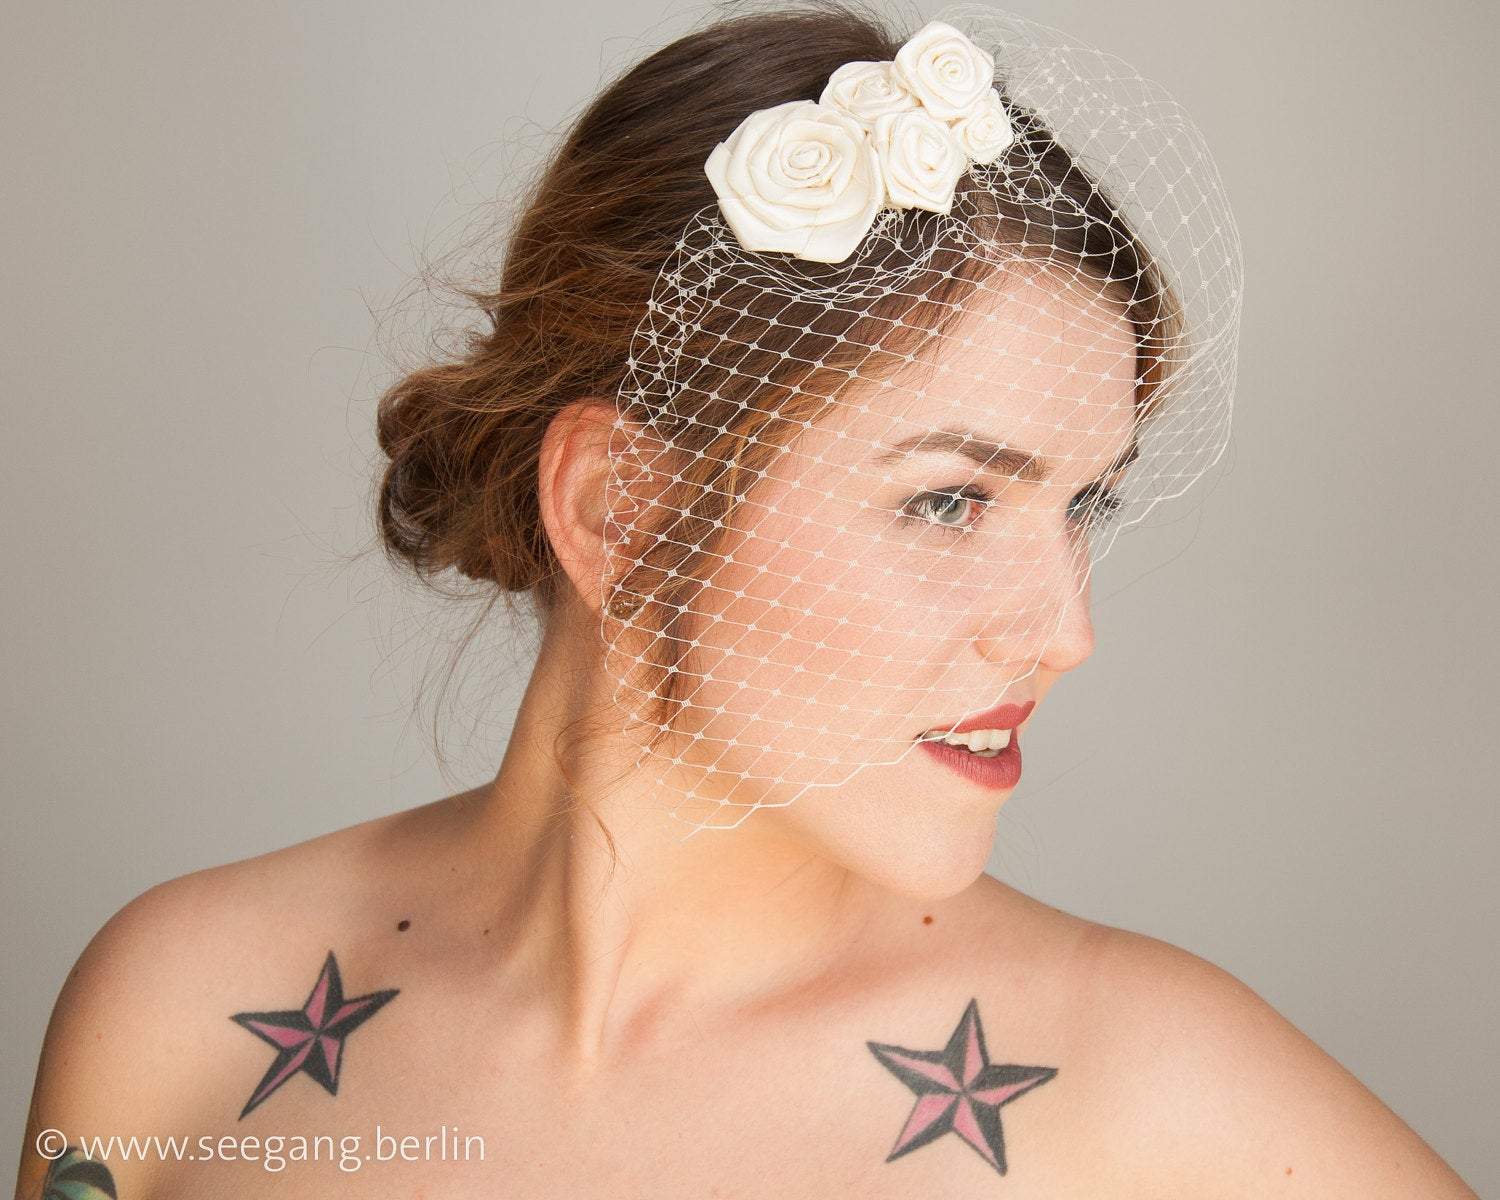 BIRDCAGE - BRIDAL VEIL HEADDRESS WITH ROSES IN MANY SHADES OF WHITE, CREME, IVORY AND CHAMPAGNE © Seegang Berlin